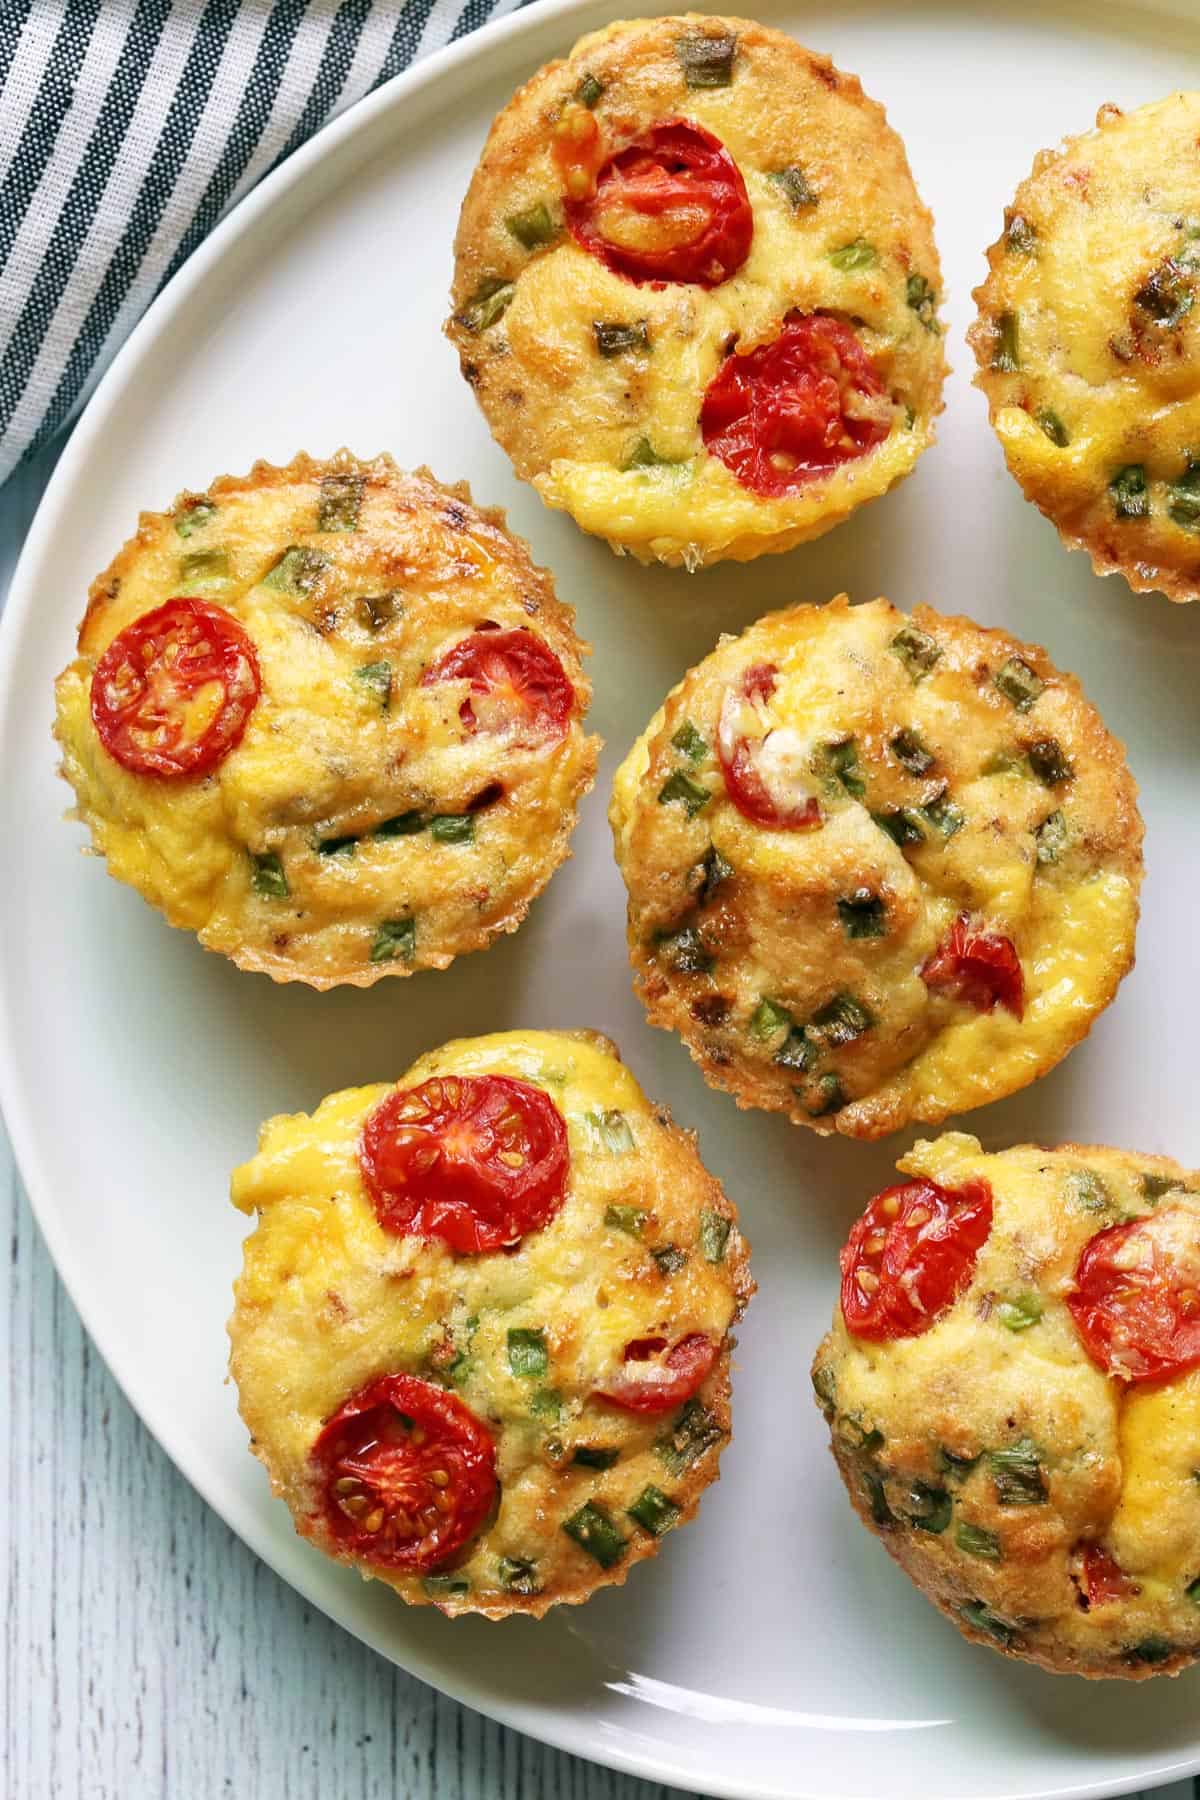 Egg muffins are served on a white plate. 